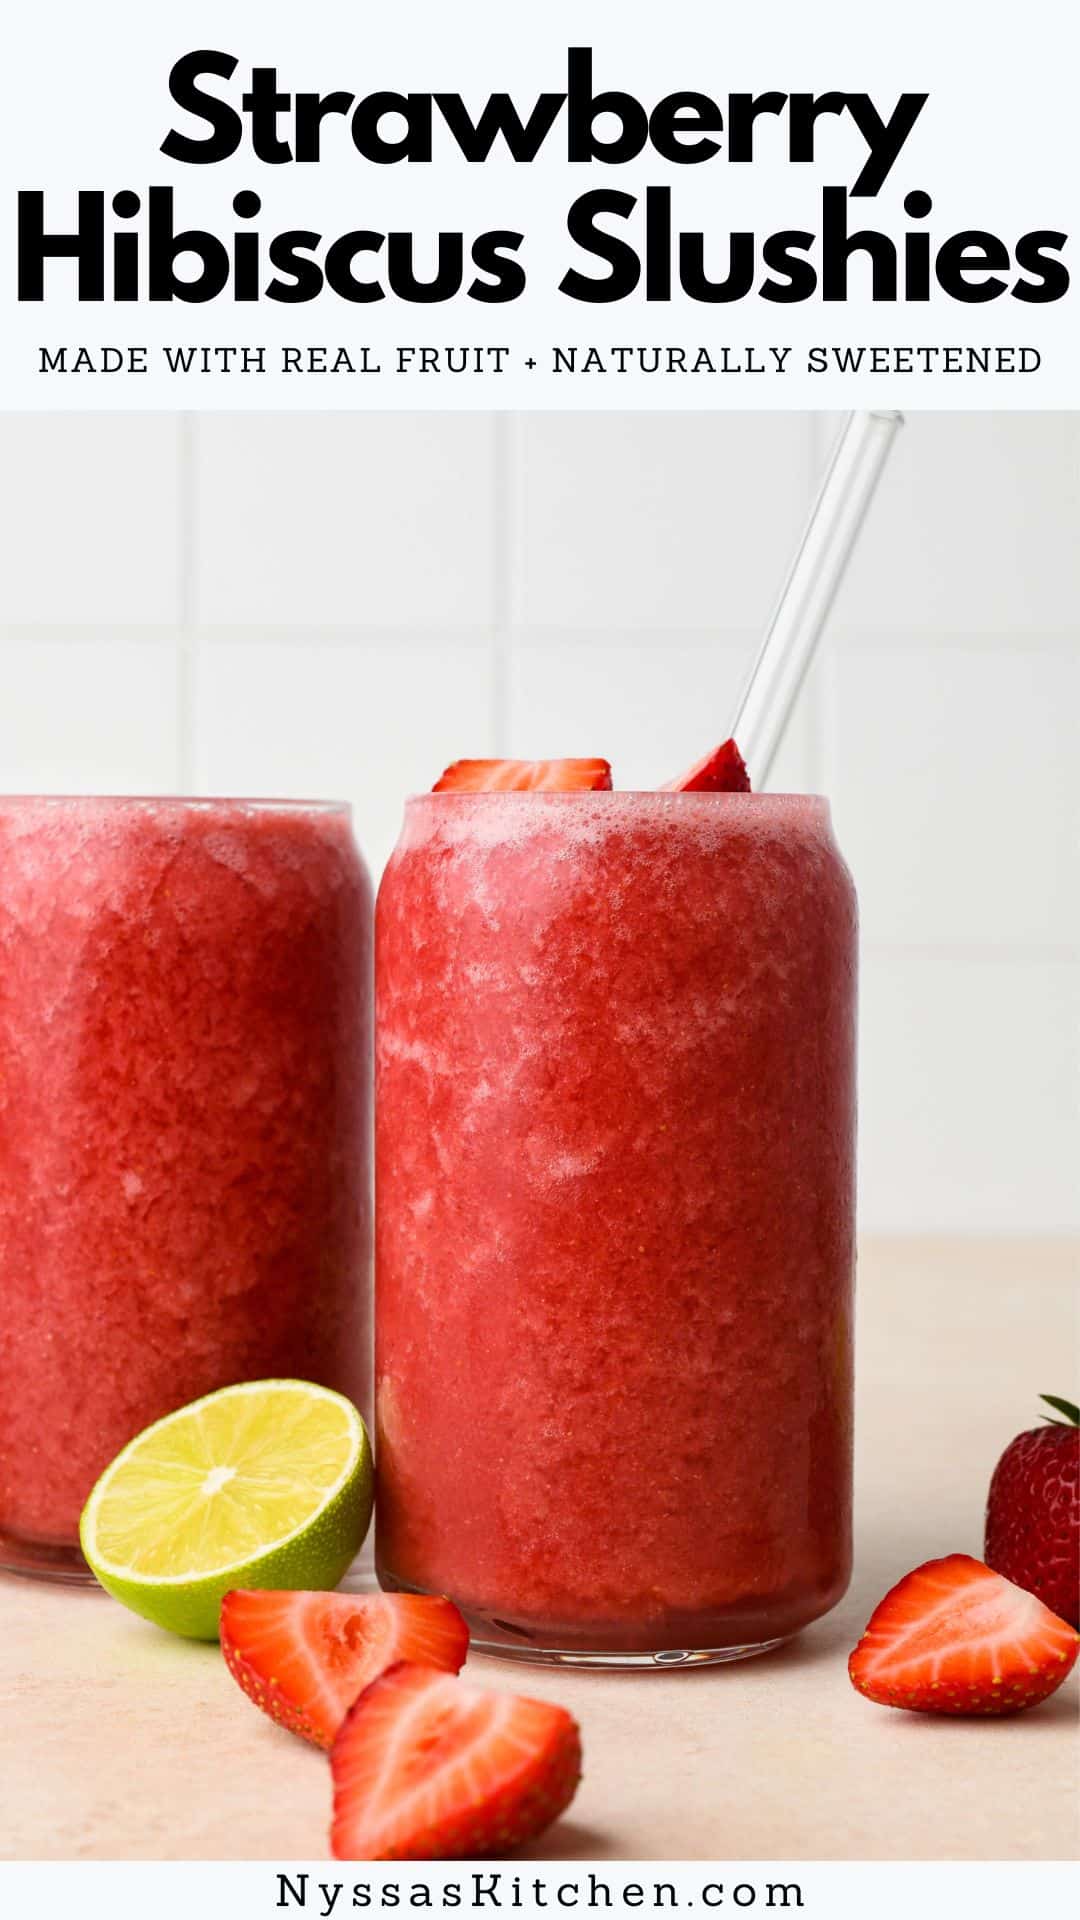 Nothing says summer quite like strawberry hibiscus slushies! An easy frozen drink made with real, good-for-you ingredients like frozen strawberries, hibiscus tea, honey, and lime juice. Perfectly sweet tart and full of refreshing, juicy flavor! Gluten free, vegan, paleo.